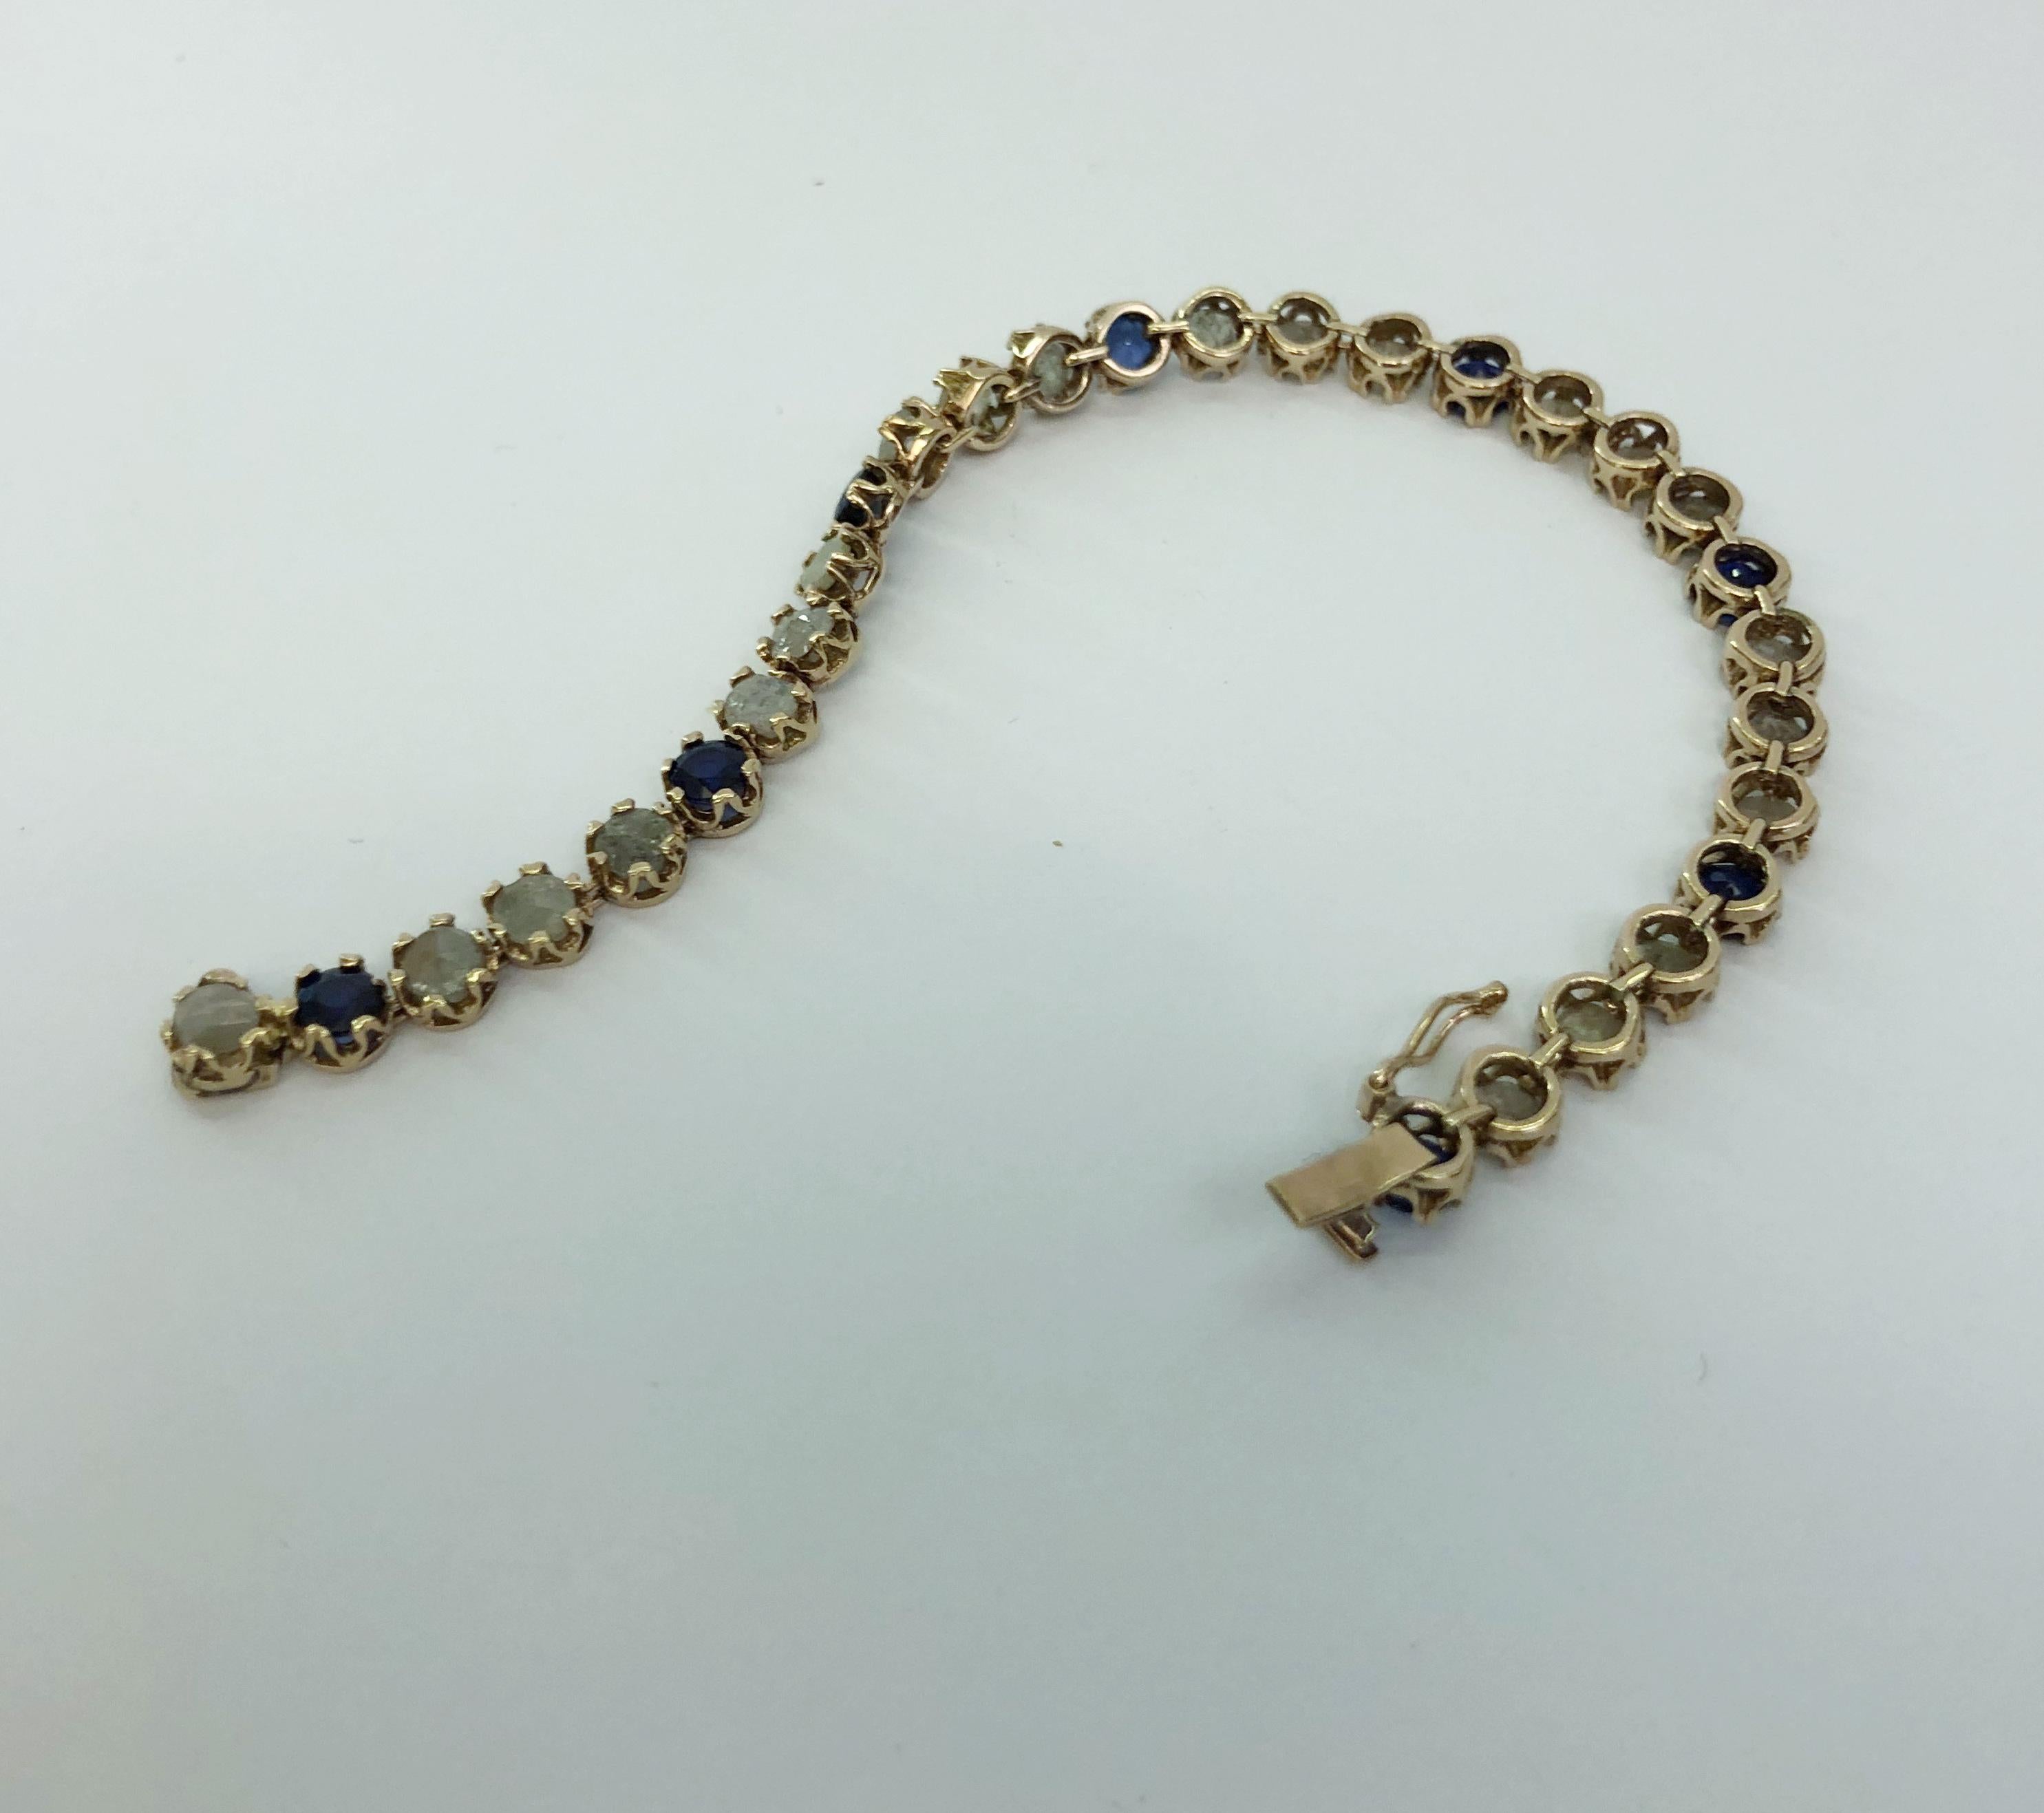 Vintage Italian bracelet in 14 karat yellow gold, diamonds and sapphires / Made in Italy 1950s